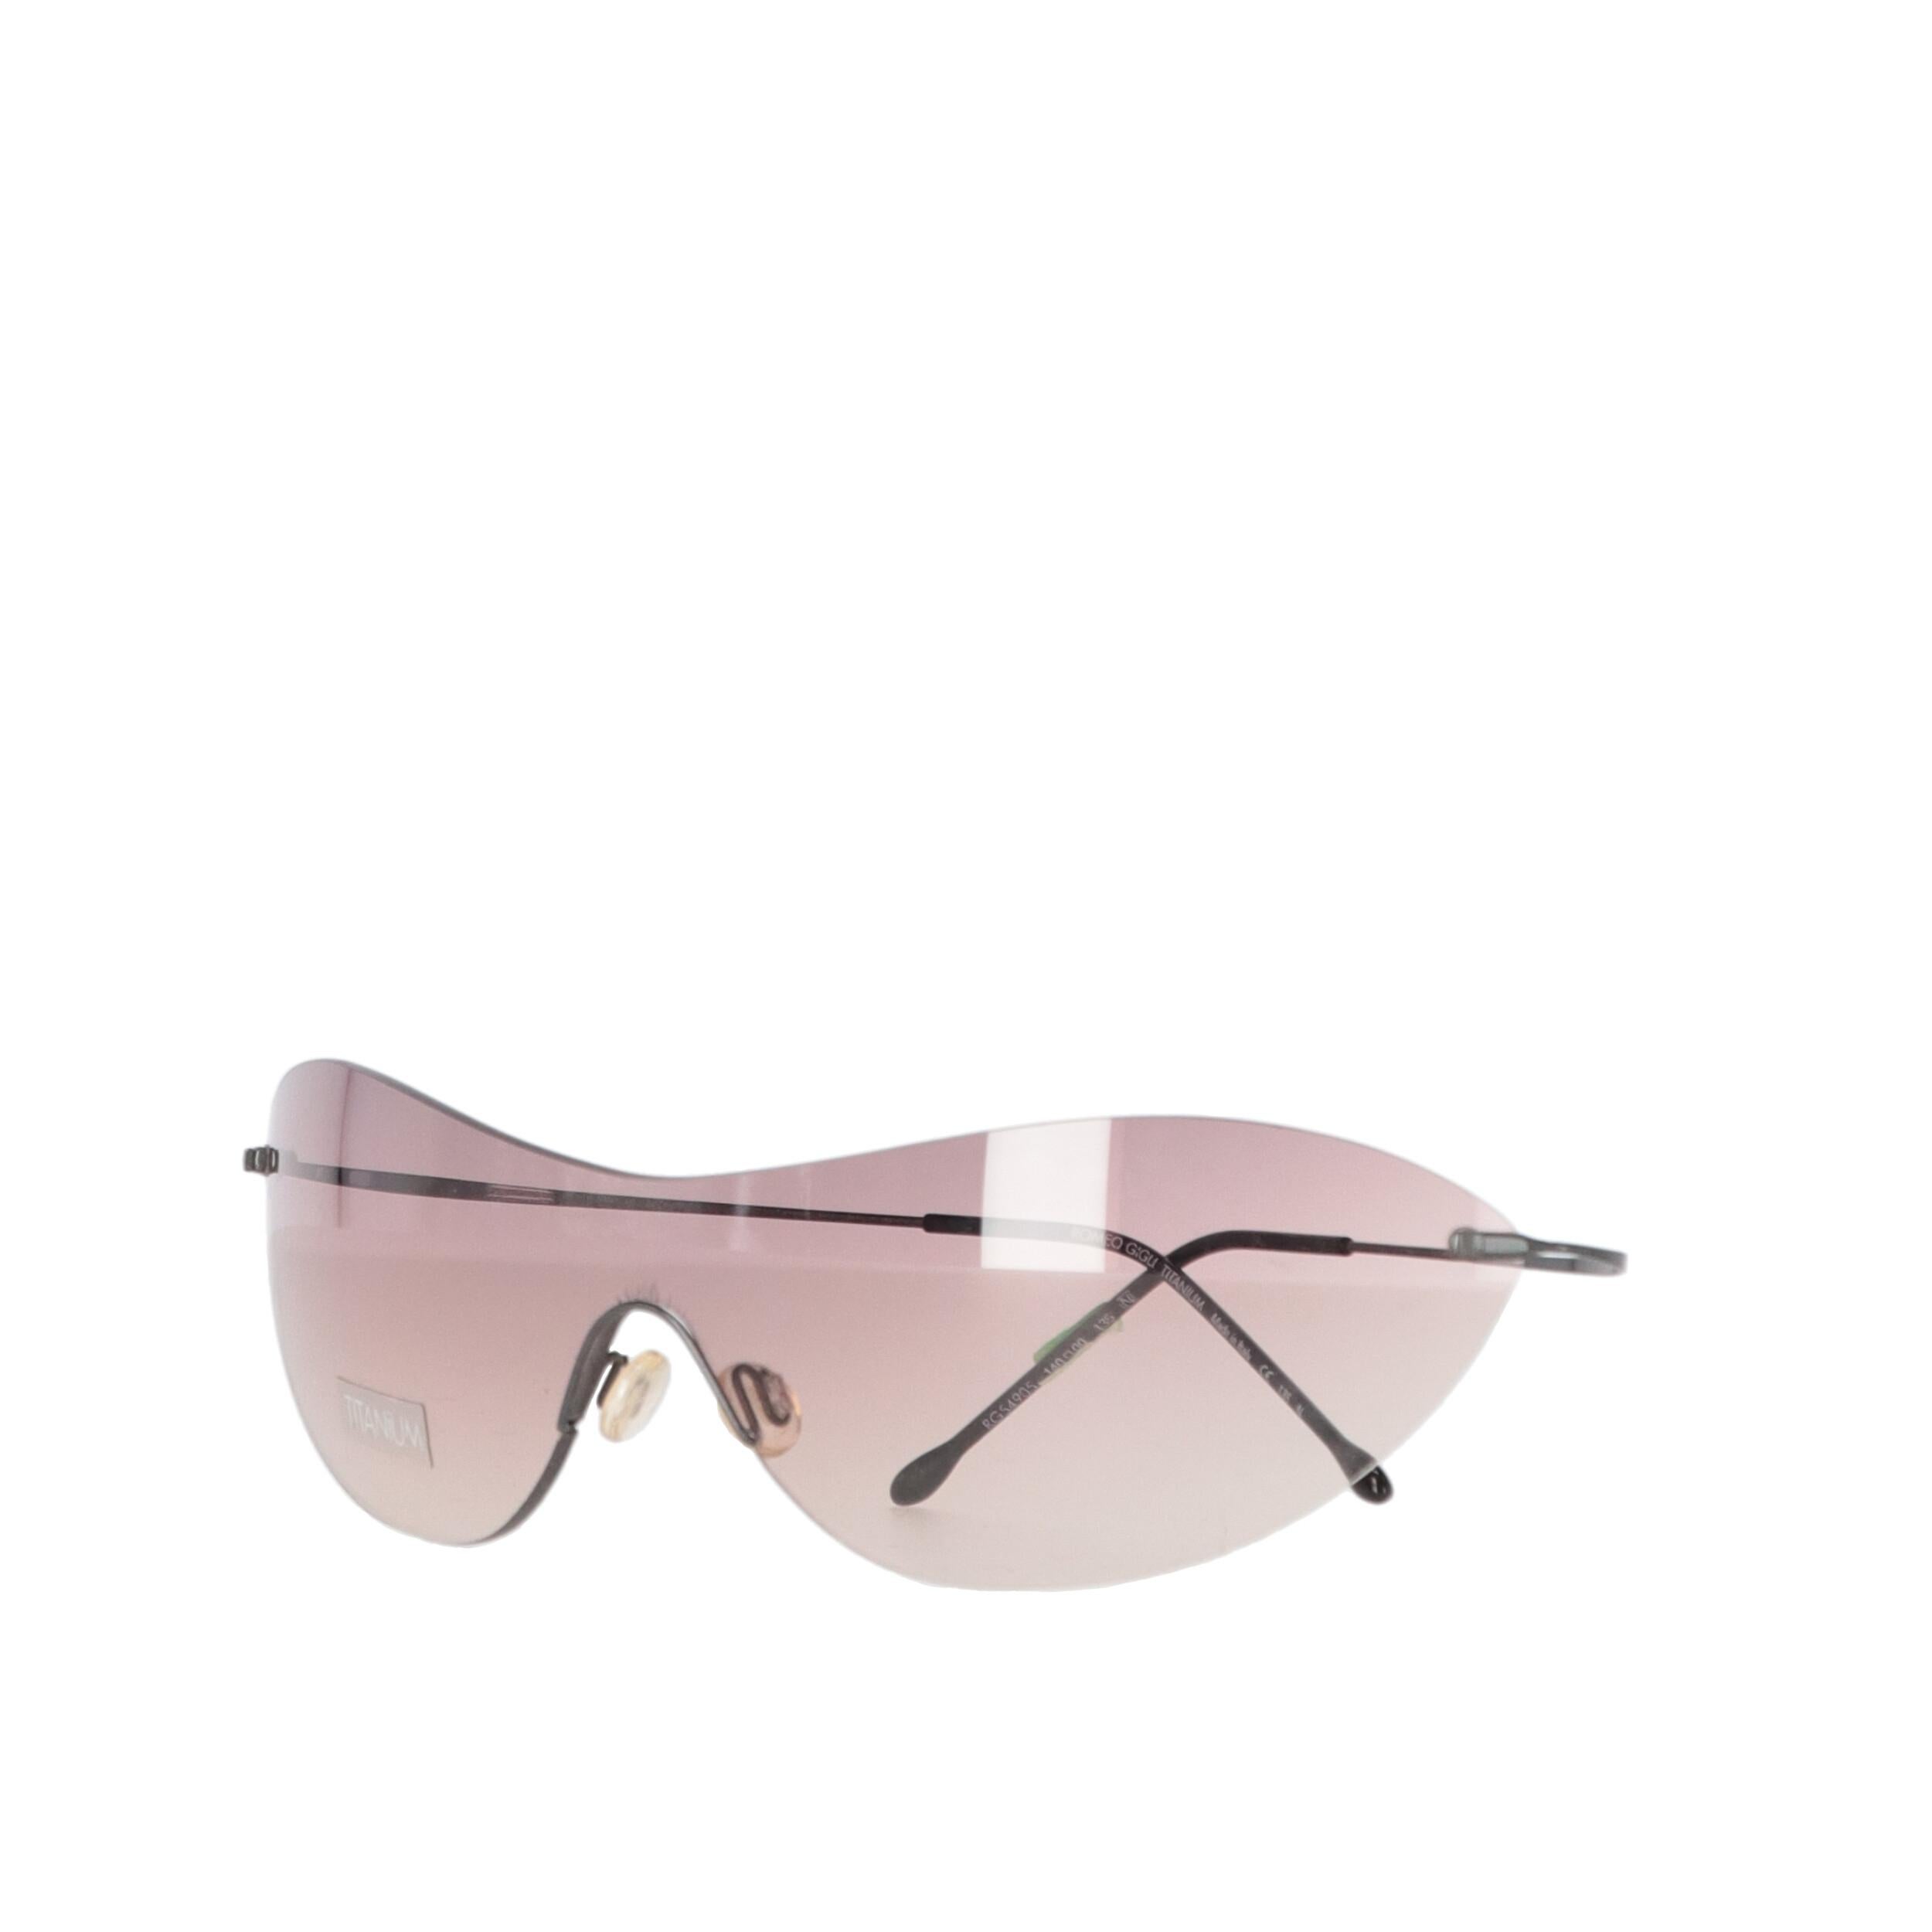 Romeo Gigli pink mask glasses with rounded lenses and and thin titanium temples.

Please note, this item cannot be shipped to the US.
Years: 90s

Made in Italy

Width: 17 cm
Height: 4 cm